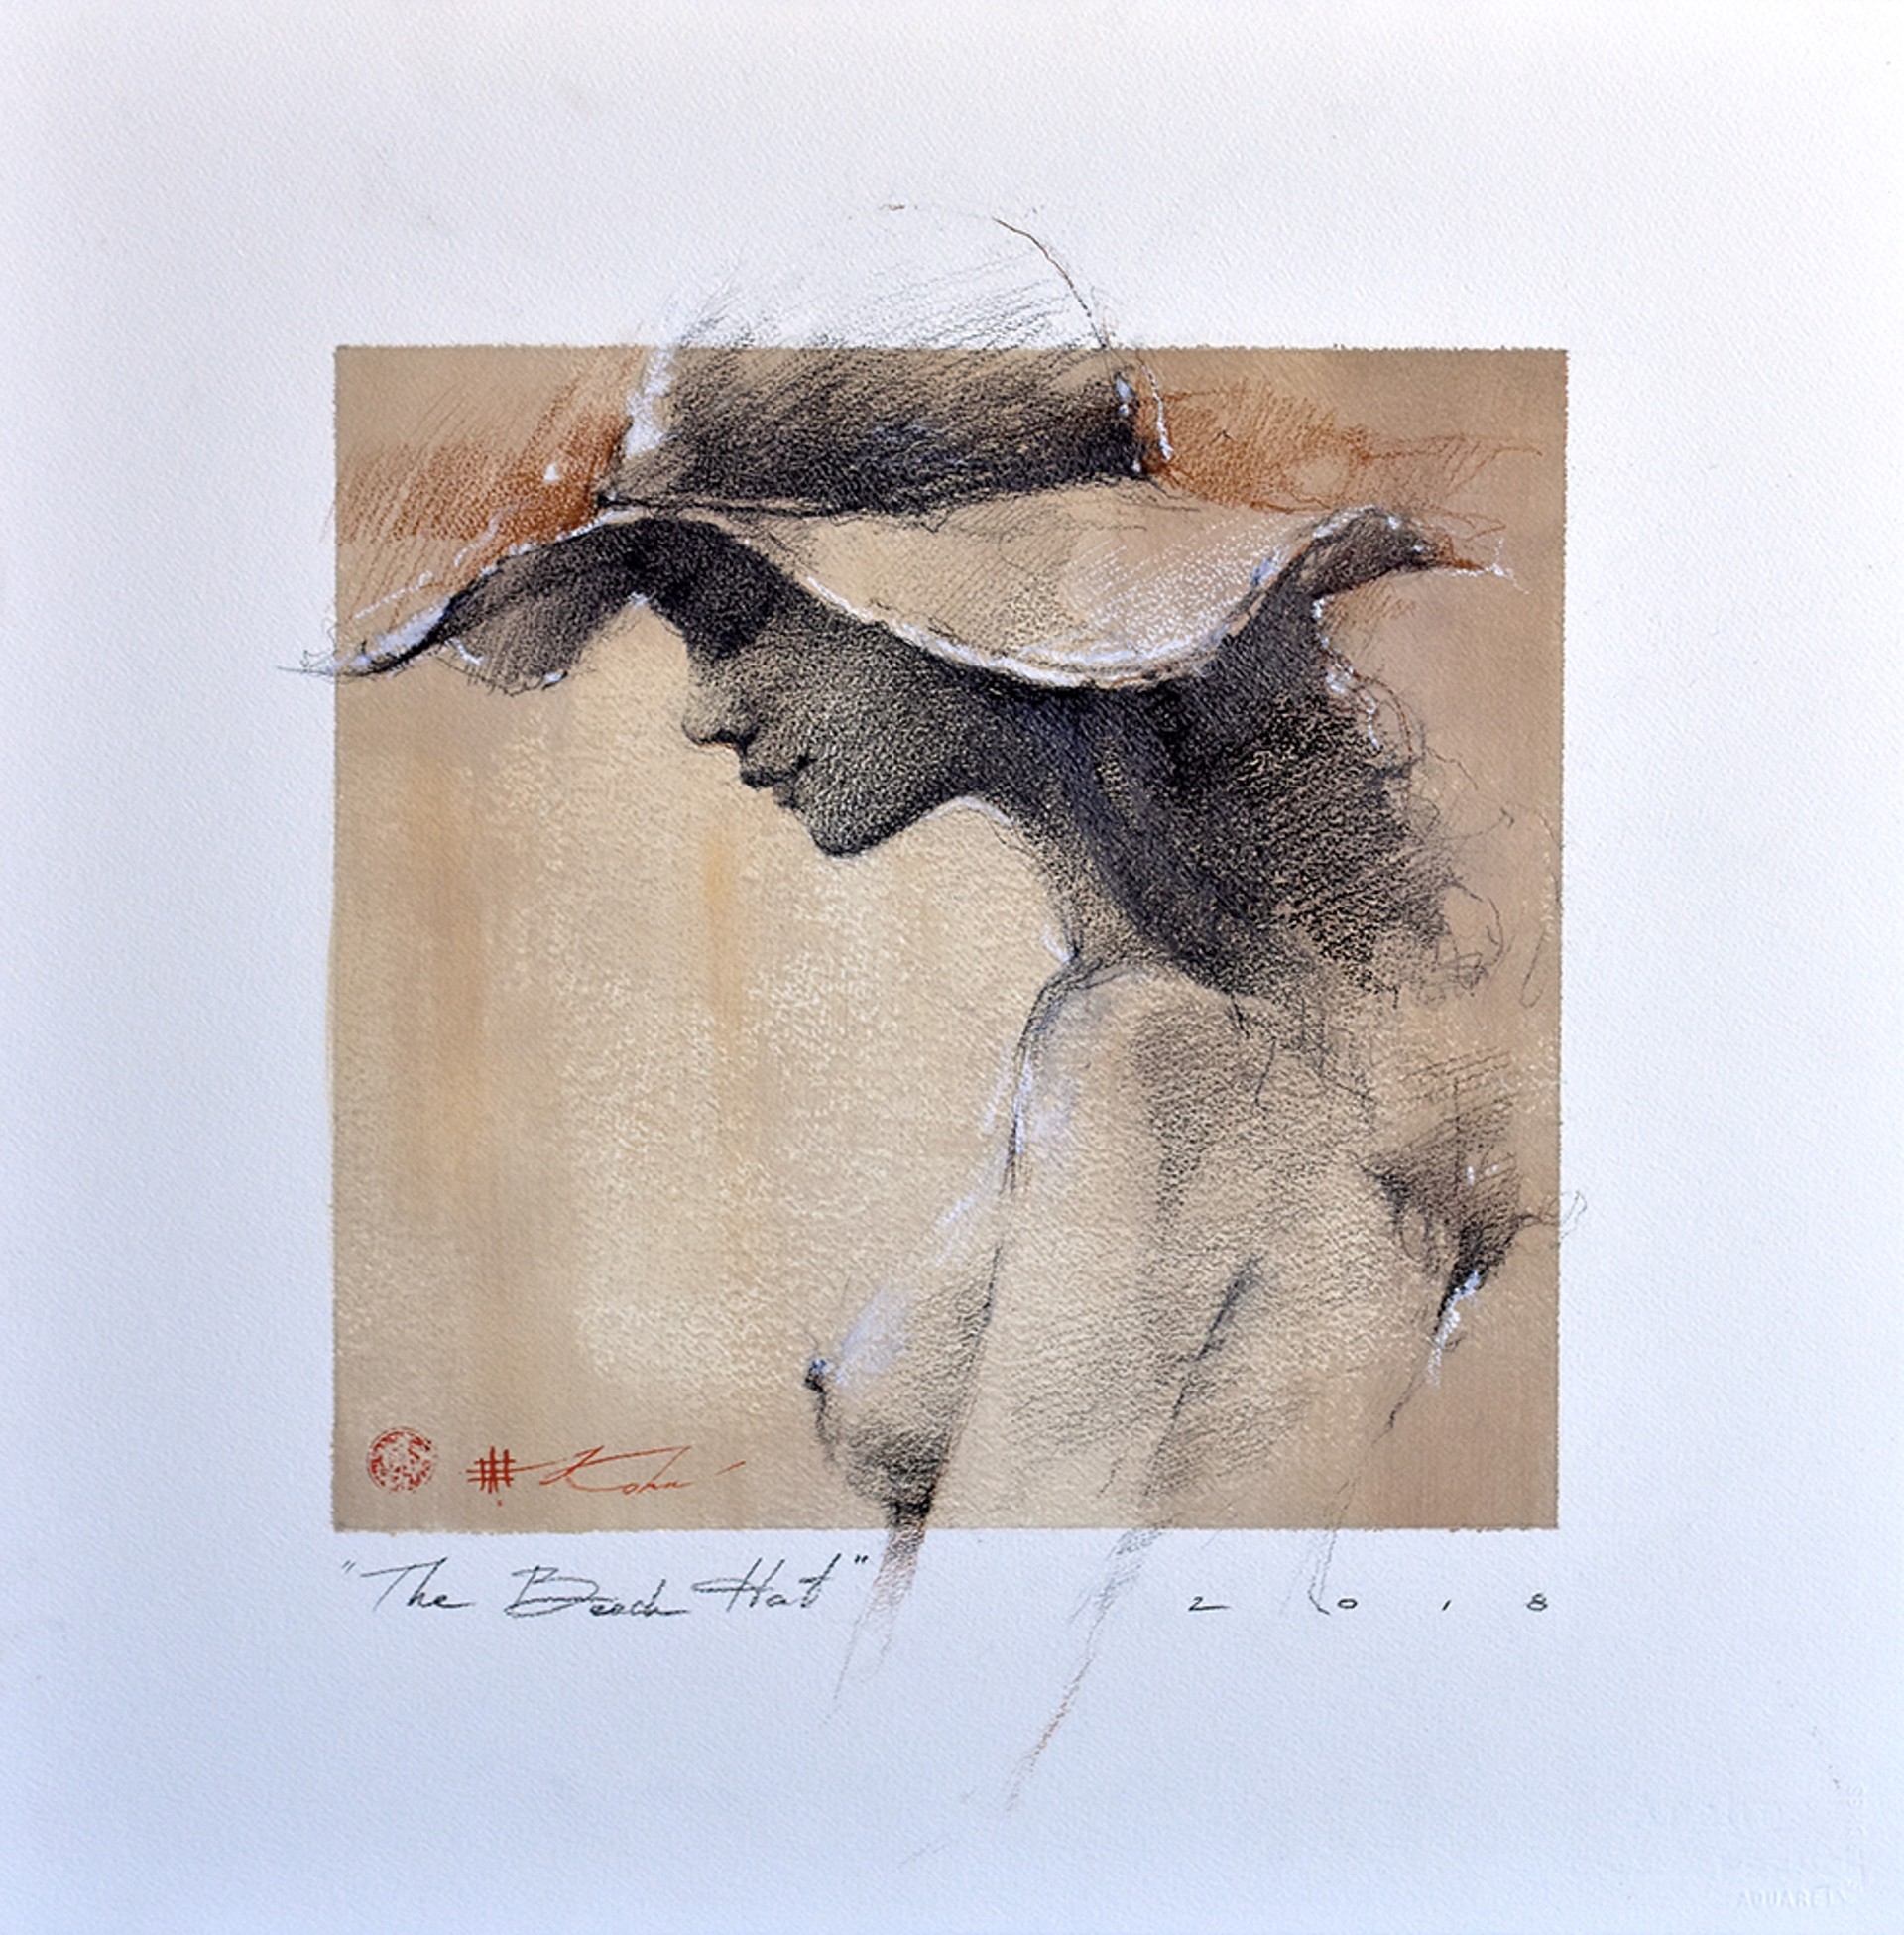 "The Beach Hat" by Andre Kohn